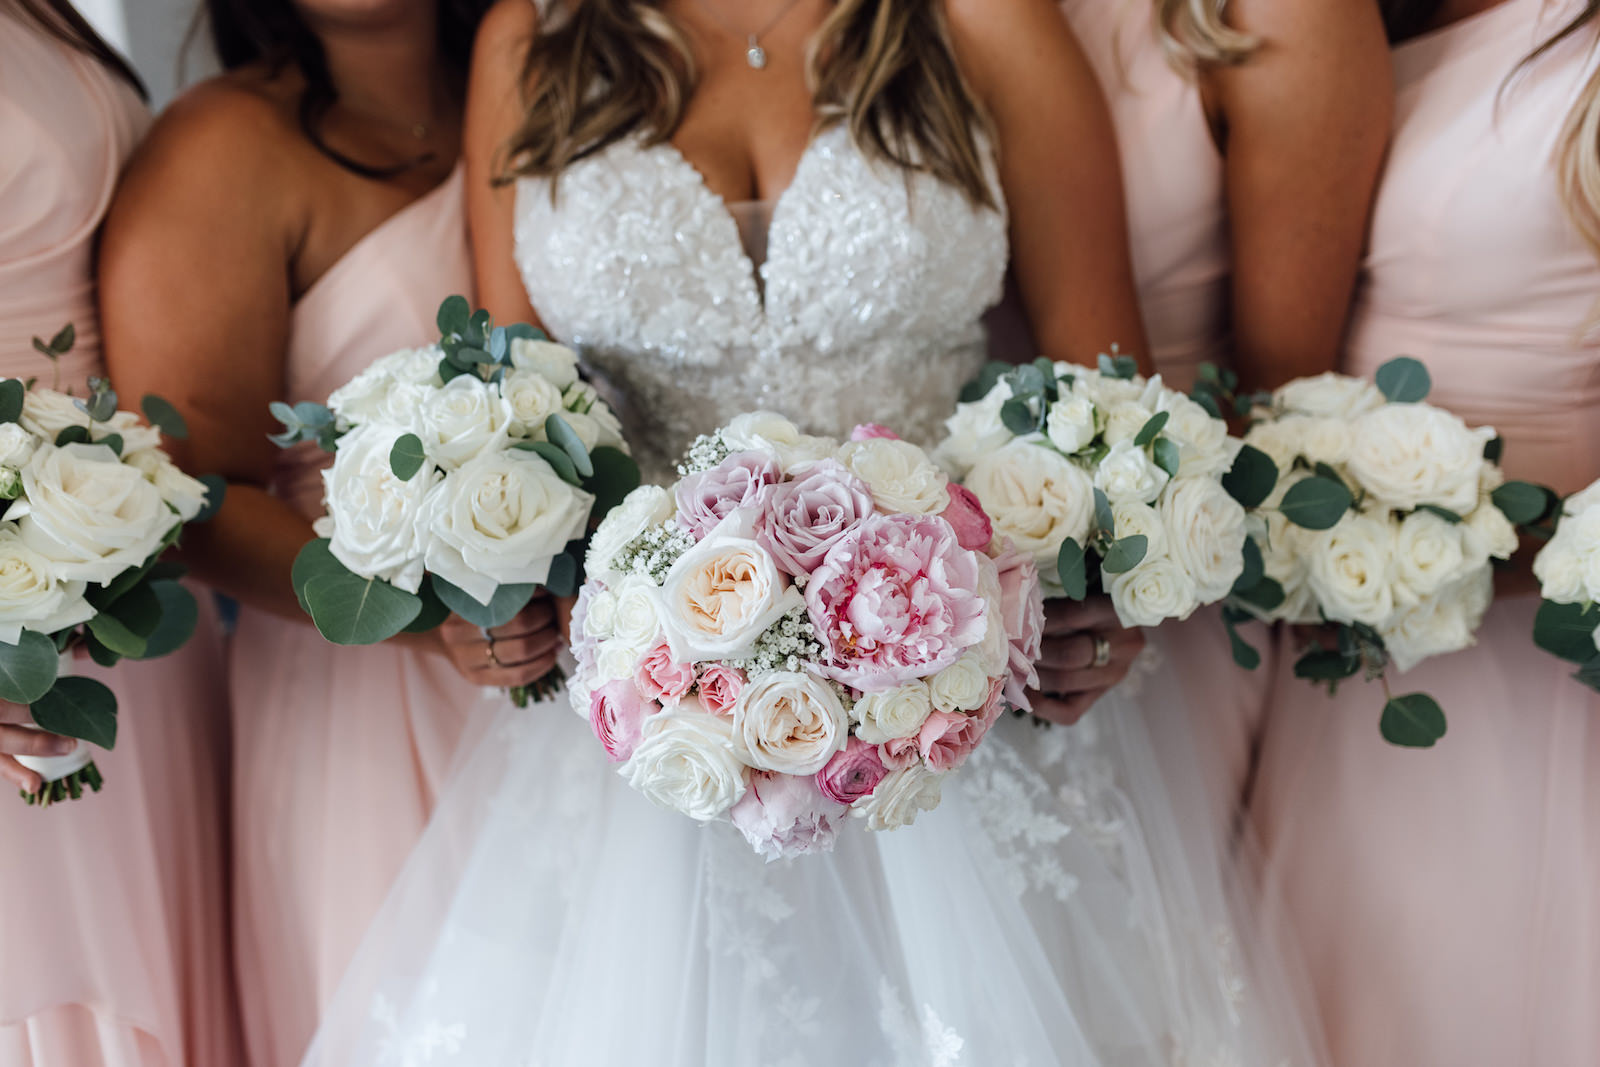 White Rose and Greenery Bridesmaids Bouquets and Blush, Pink, and White Bridal Bouquet | St. Pete Beach Wedding Florist Bruce Wayne Florals